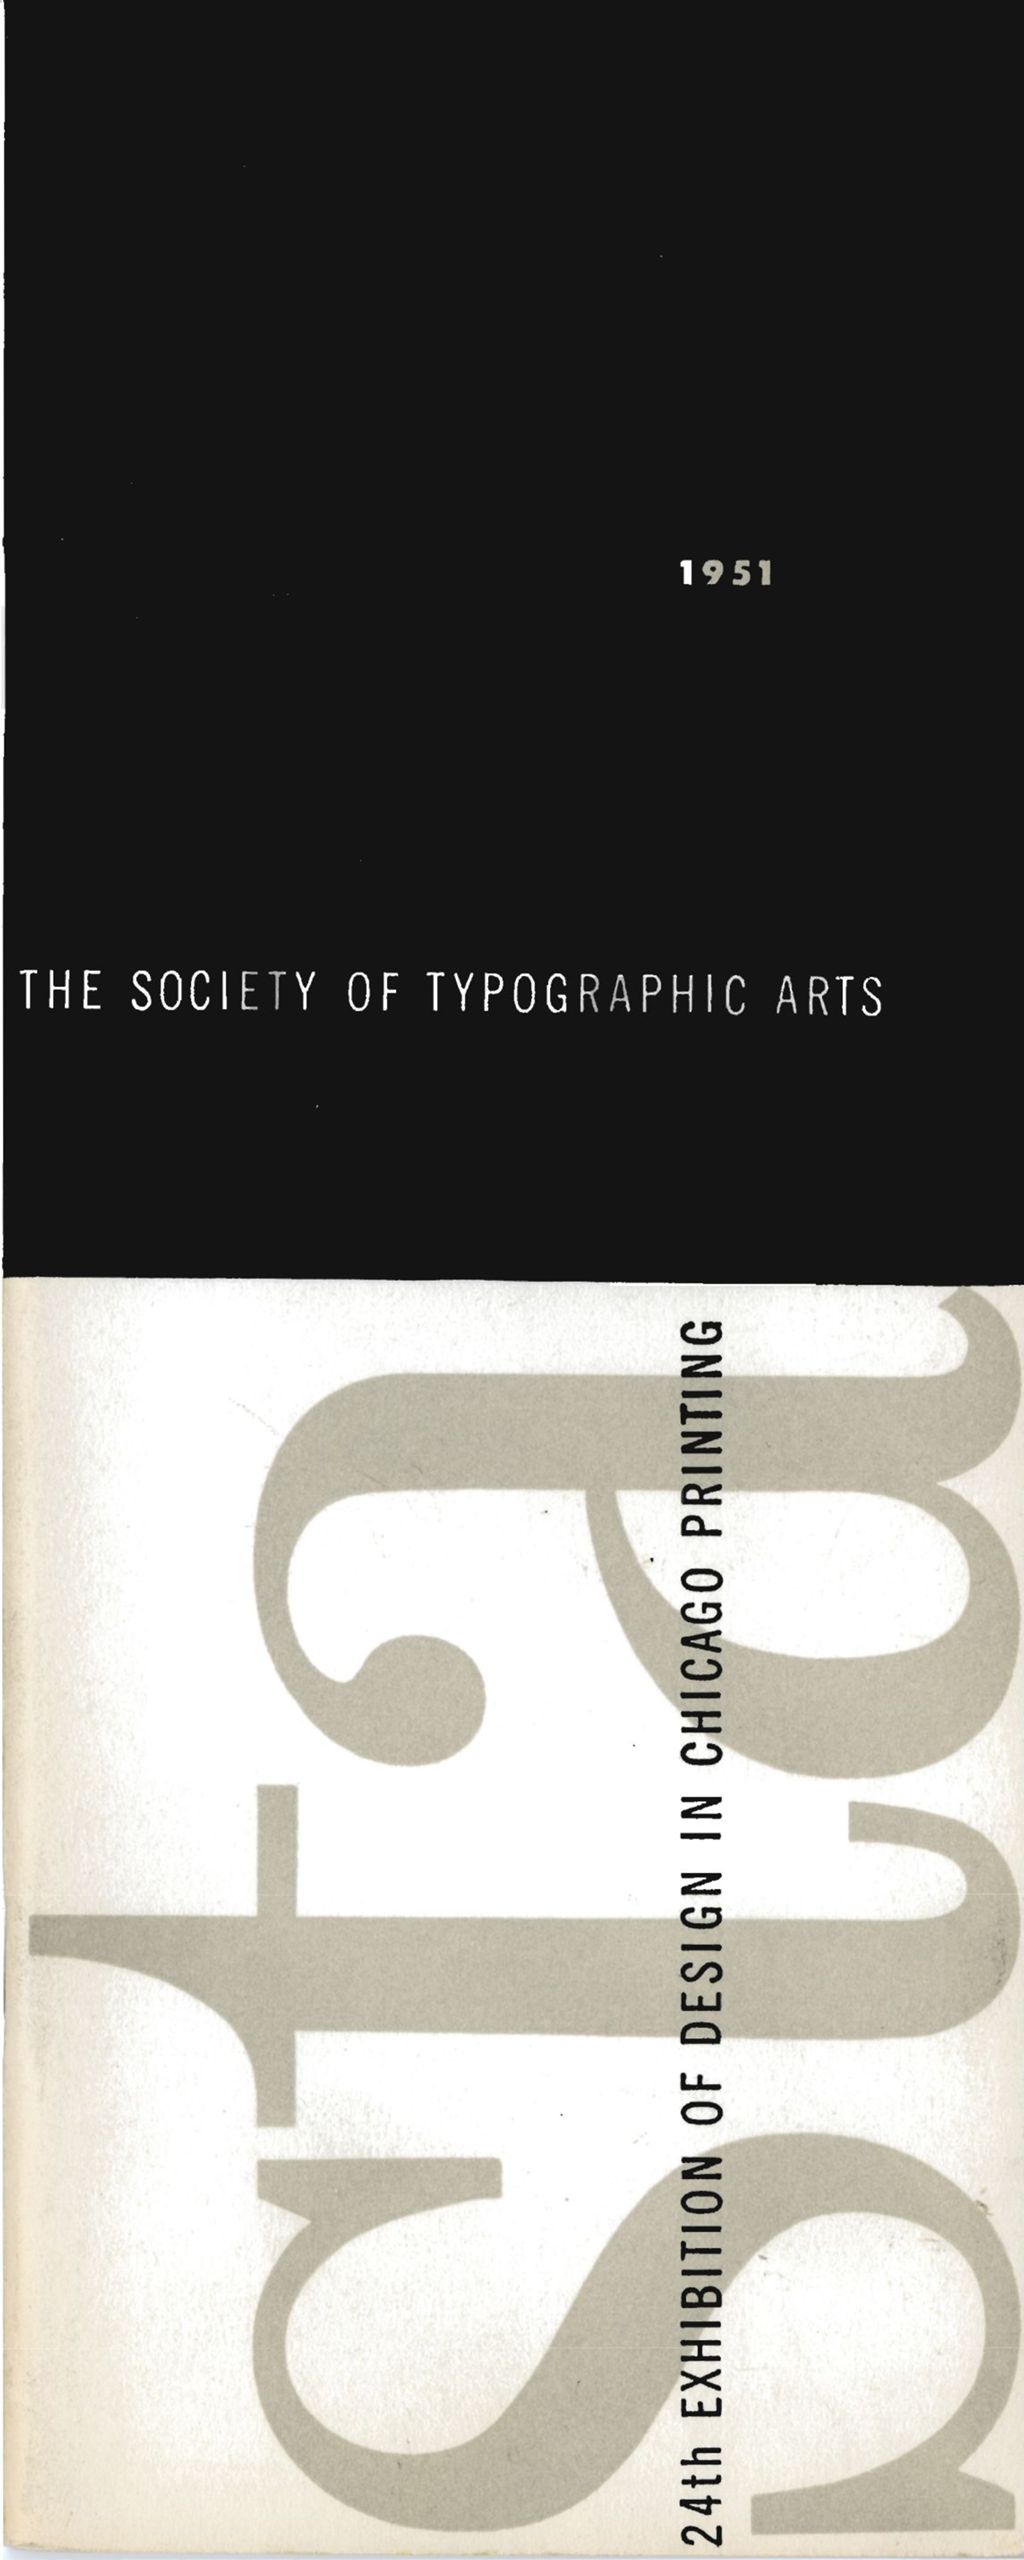 Miniature of The Society of Typographic Arts 24th Annual Exhibition of Design in Chicago Printing